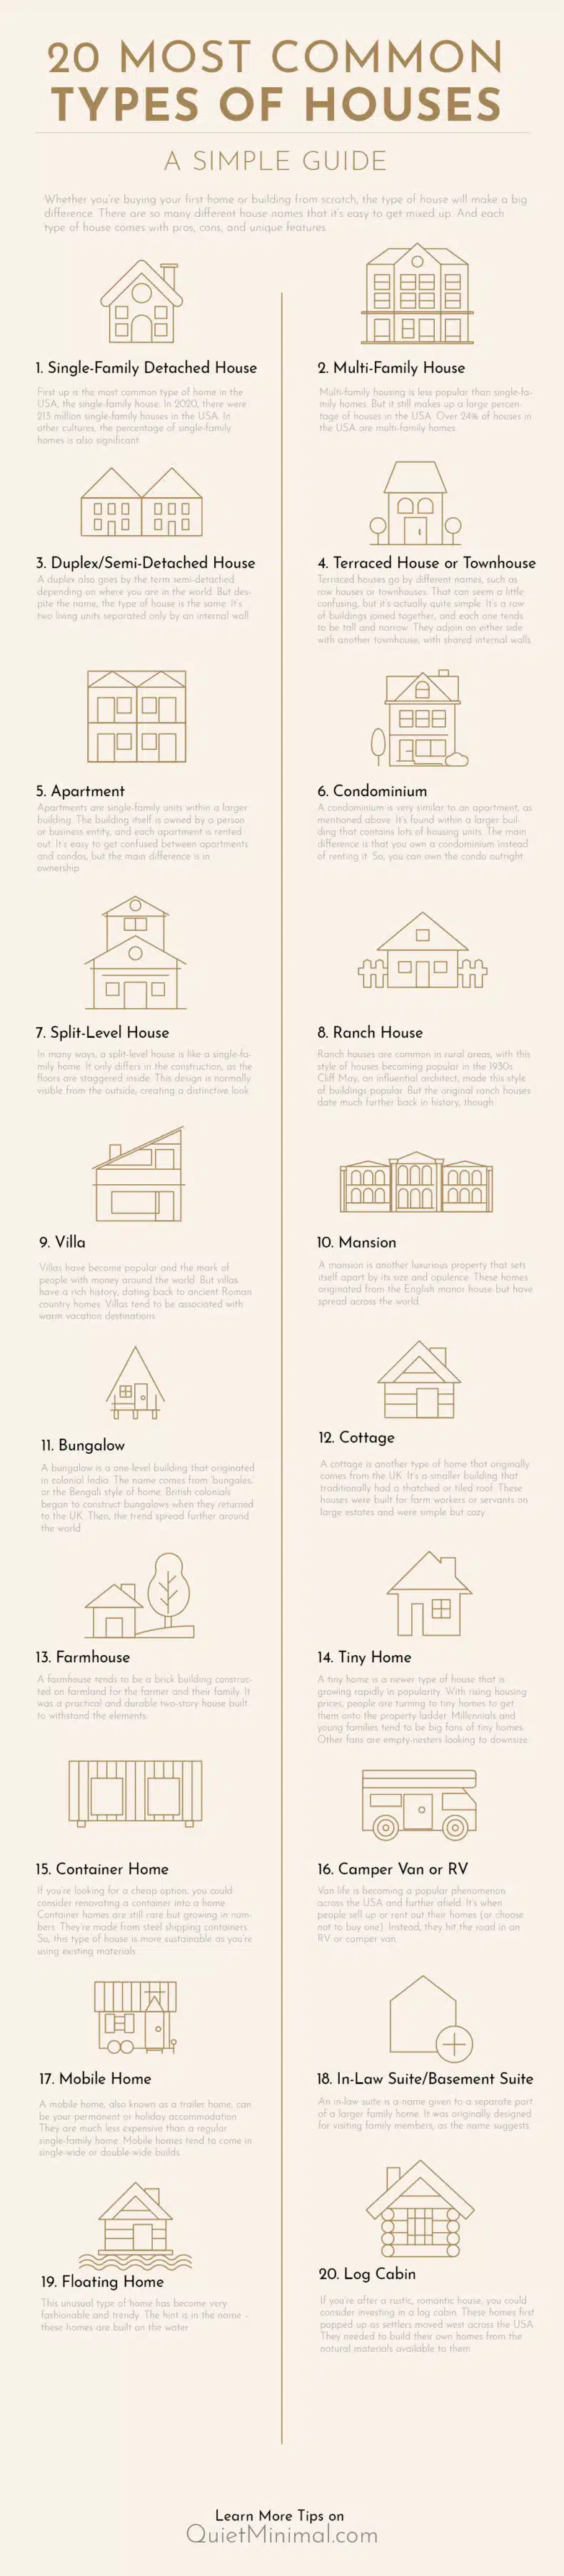 types of houses in America (Infographic)